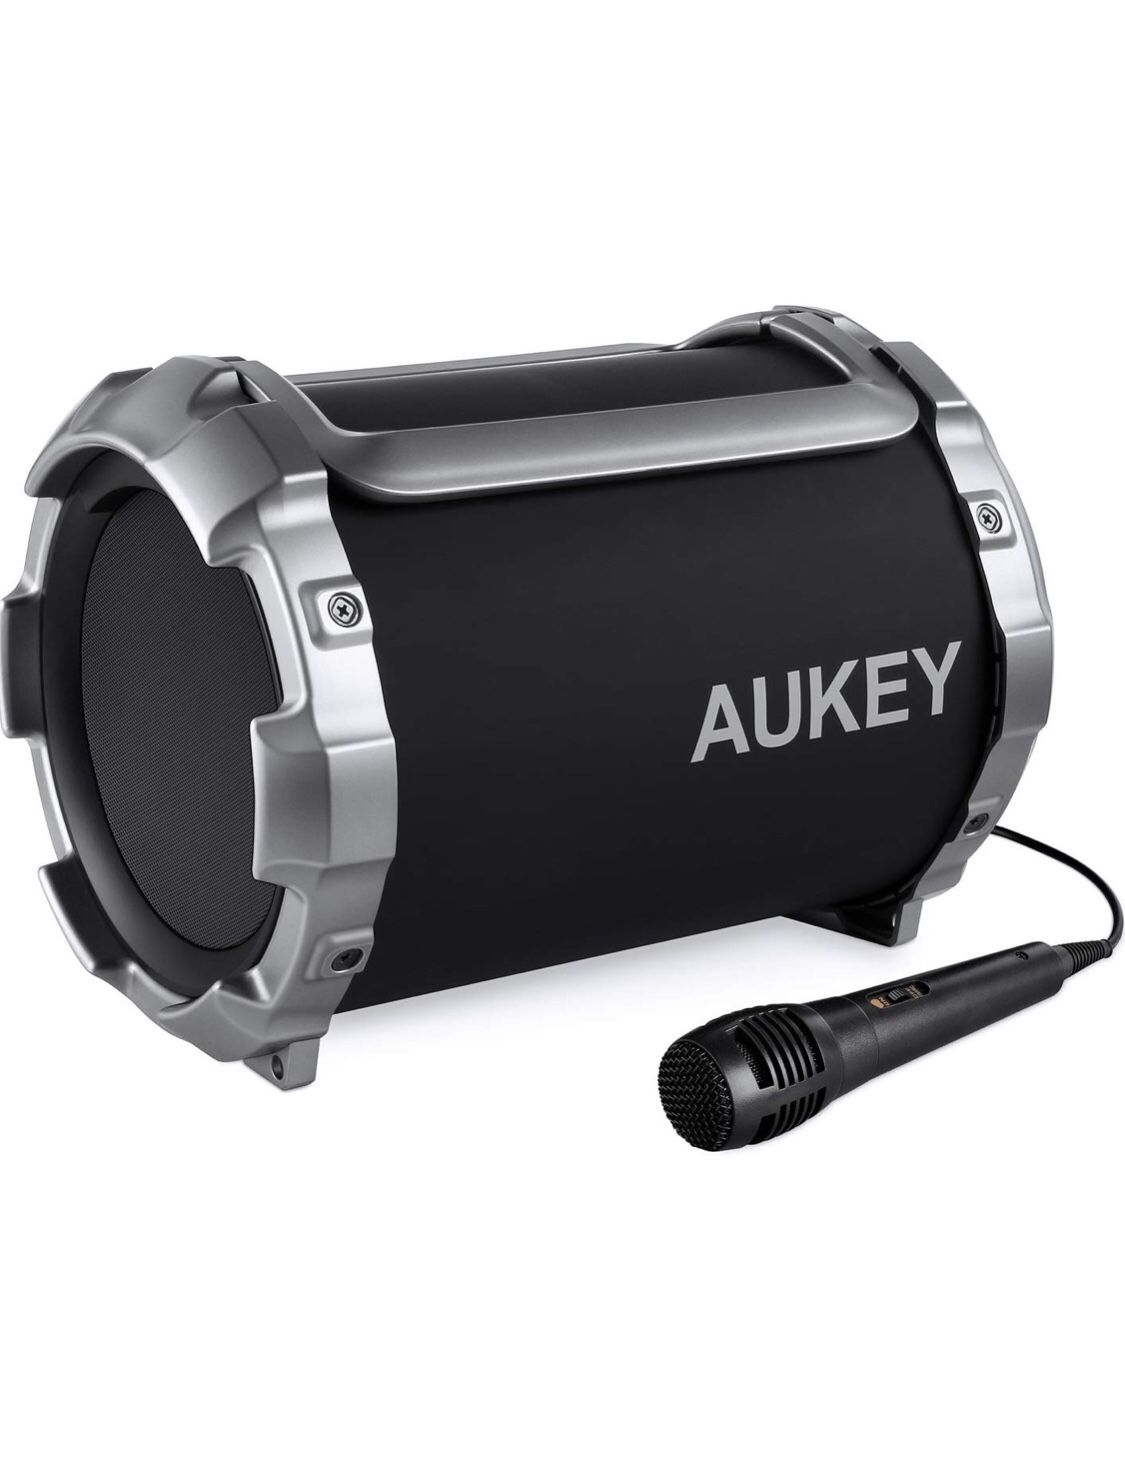 💰85 ❤️ Brand New！💰85 AUKEY Portable Bluetooth Speaker with Microphone, Adjustable Bass, FM Radio and 8 Hours Playtim